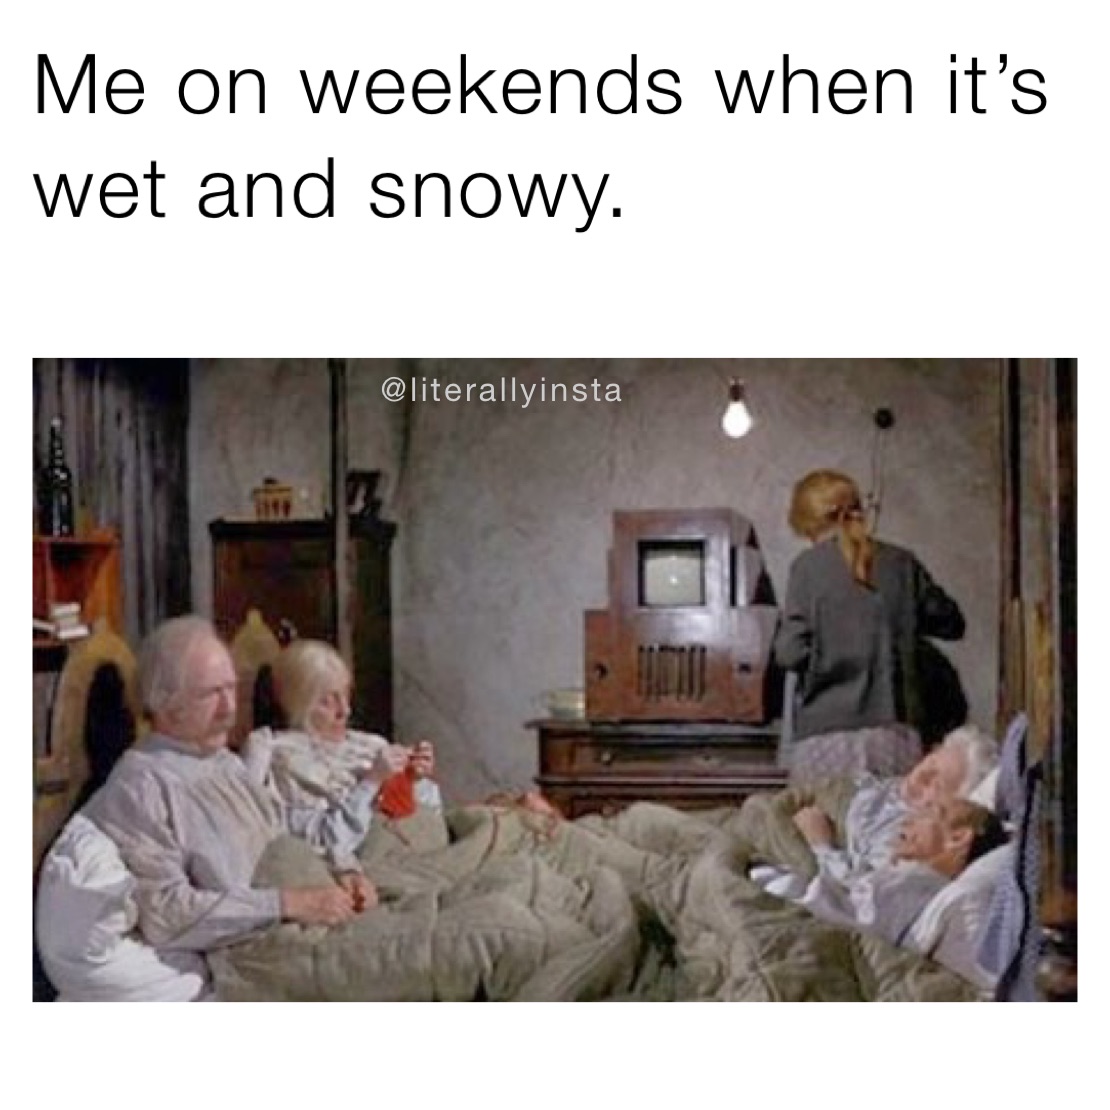 Me on weekends when it’s wet and snowy.